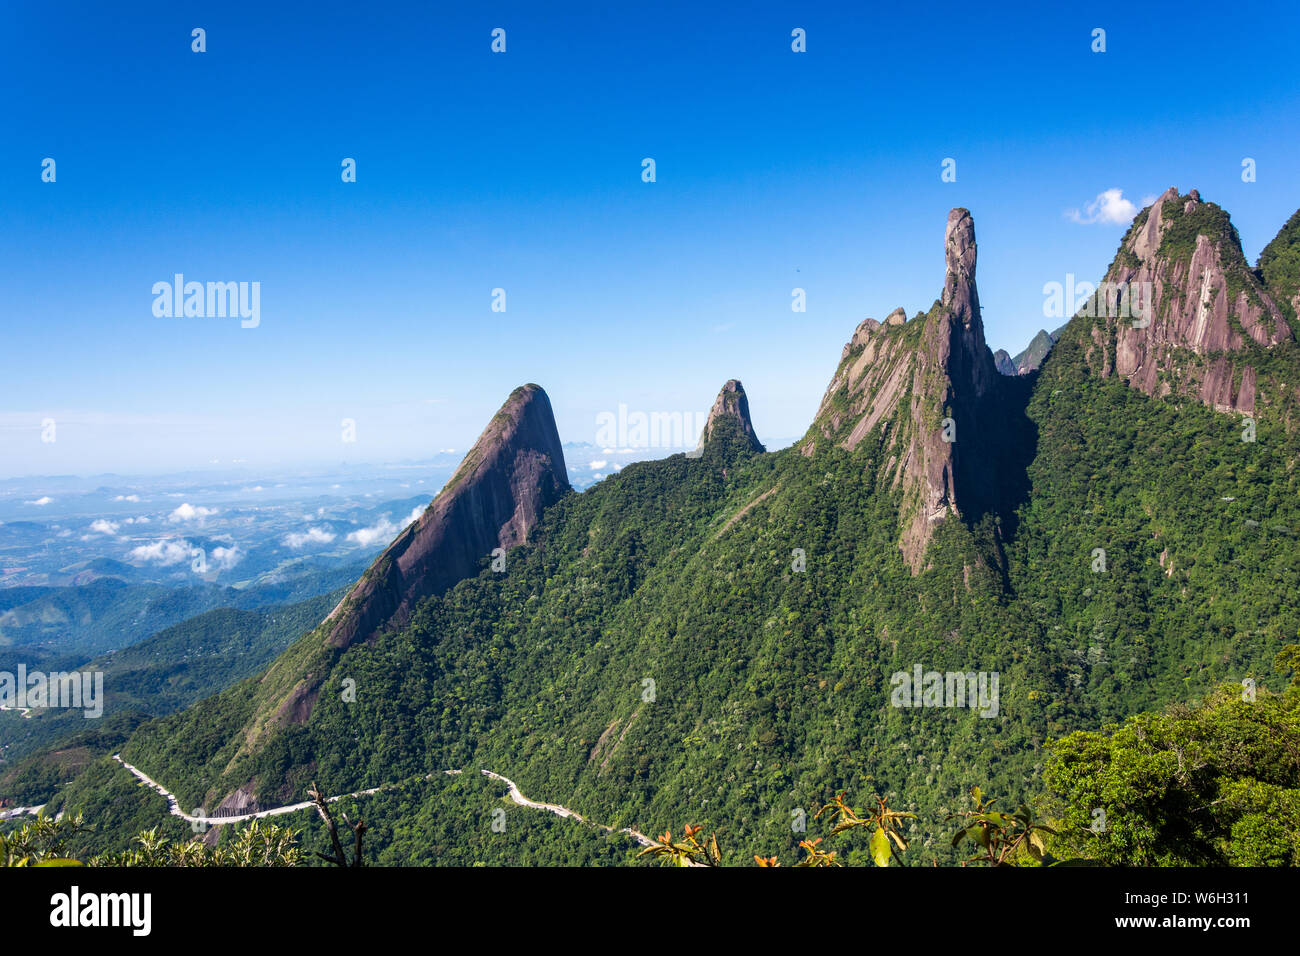 Beautiful landscape of mountains with Finger's God highlighted Stock Photo